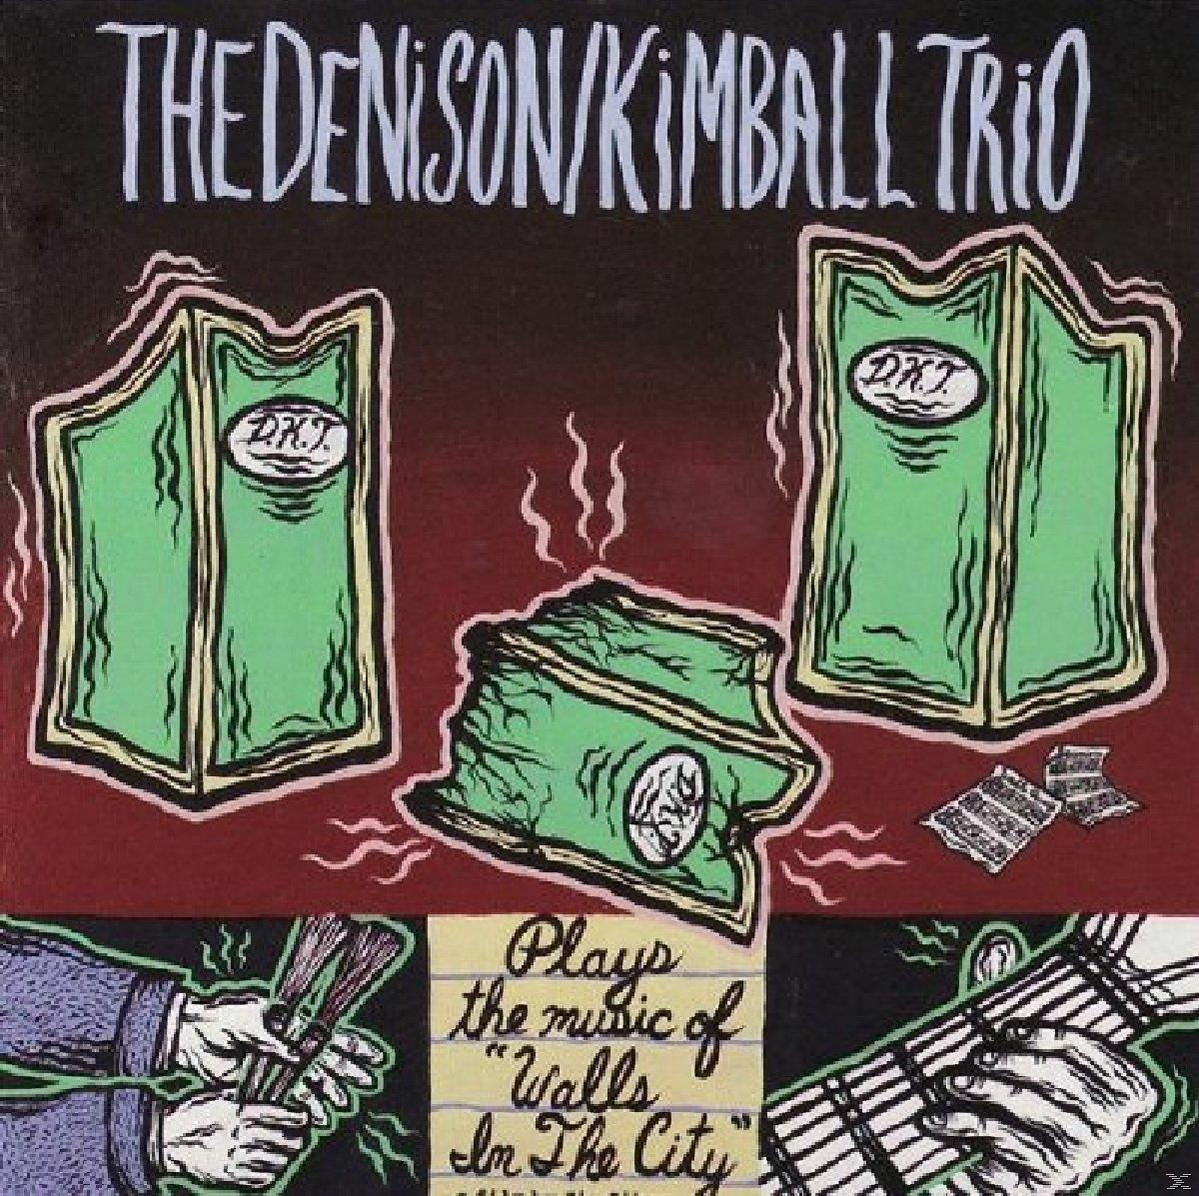 The (CD) Walls In Trio - City Denison, Kimball - The